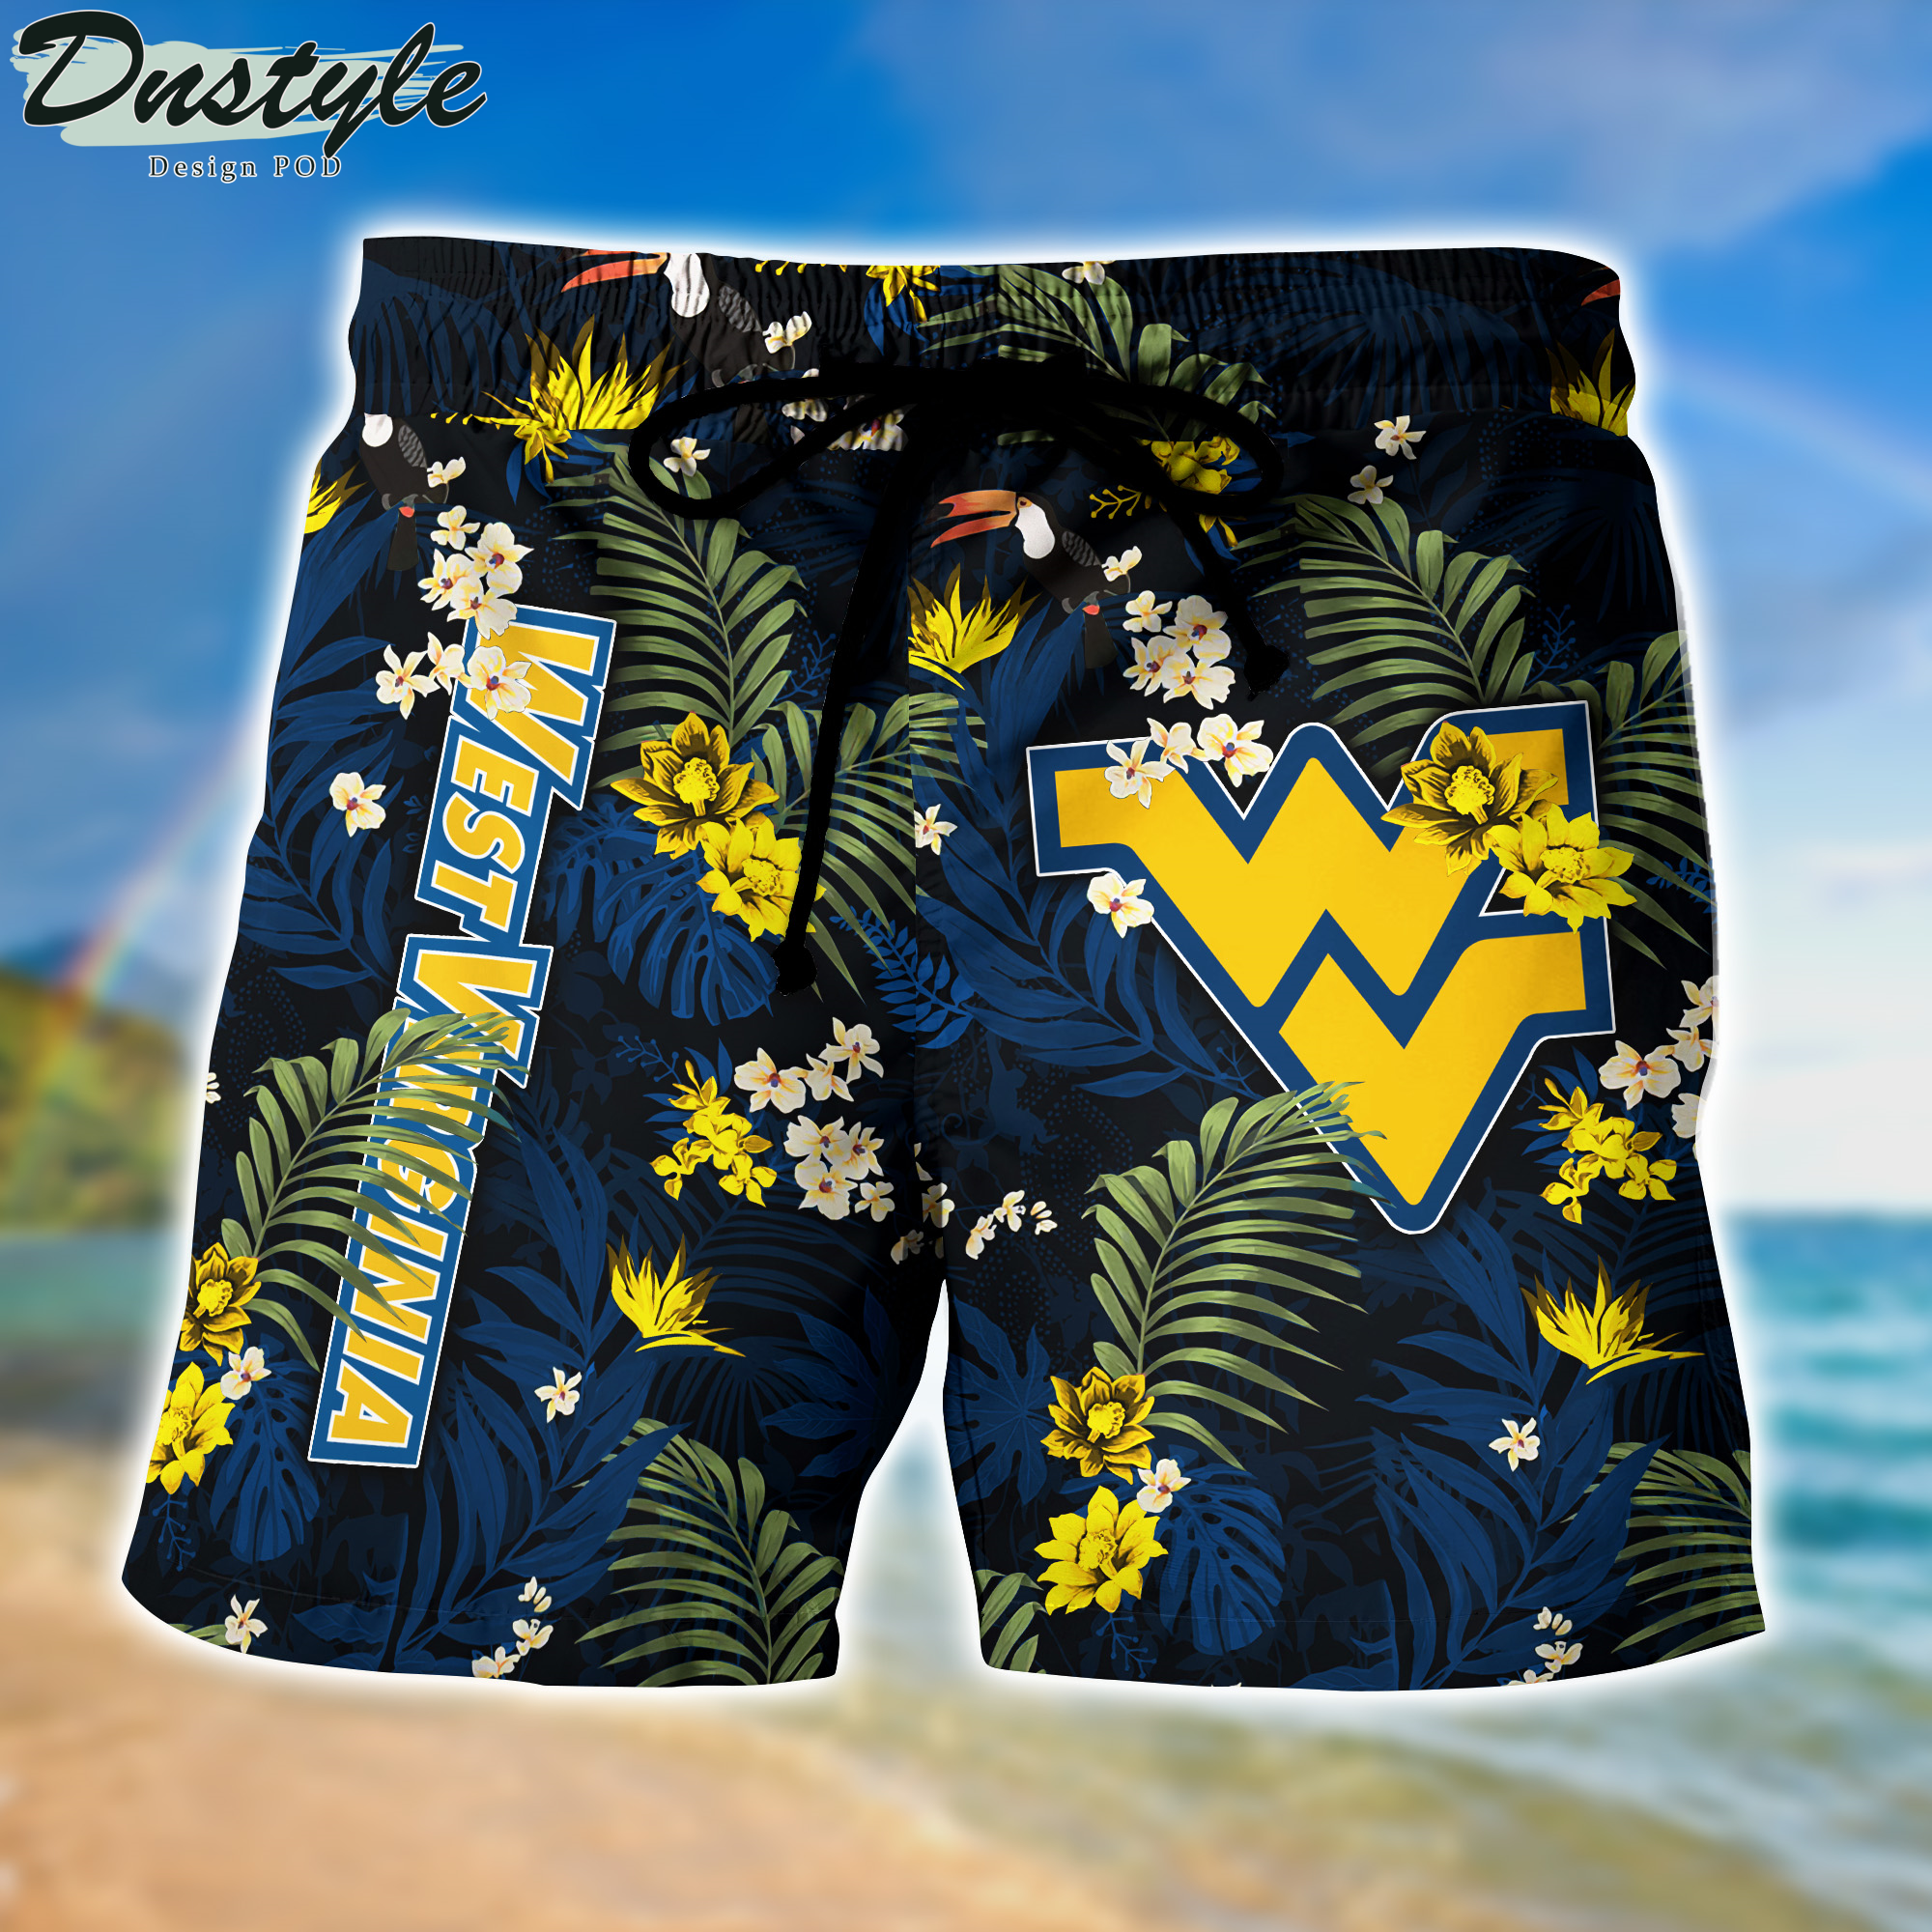 West Virginia Mountaineers Hawaii Shirt And Shorts New Collection